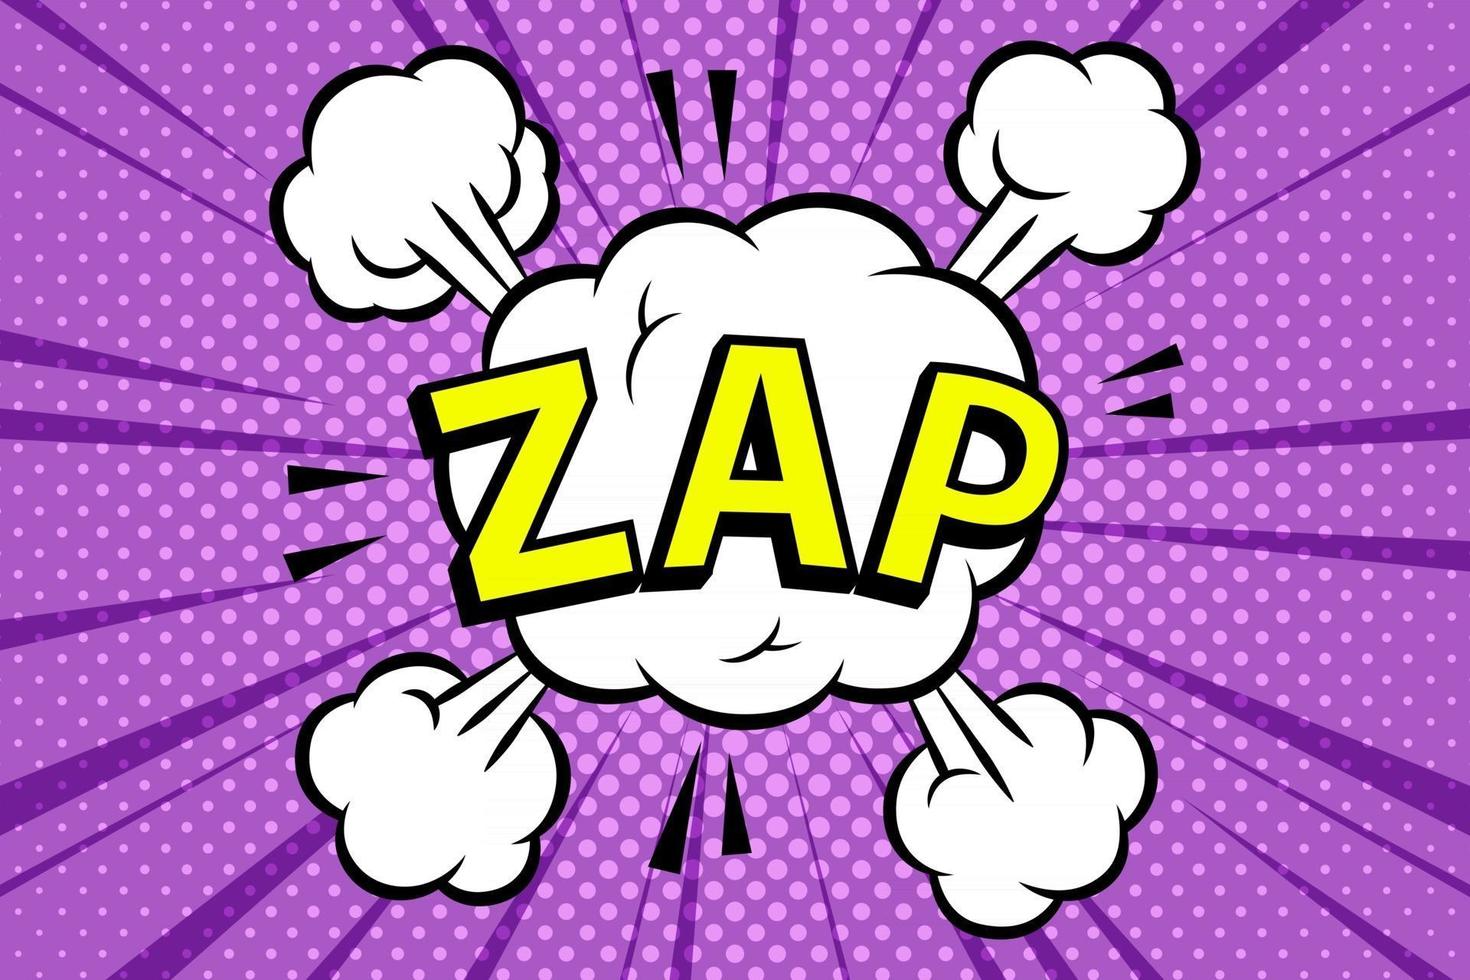 ZAP, Comics book abstract background. wording in comic speech bubble in pop art style on burst background vector